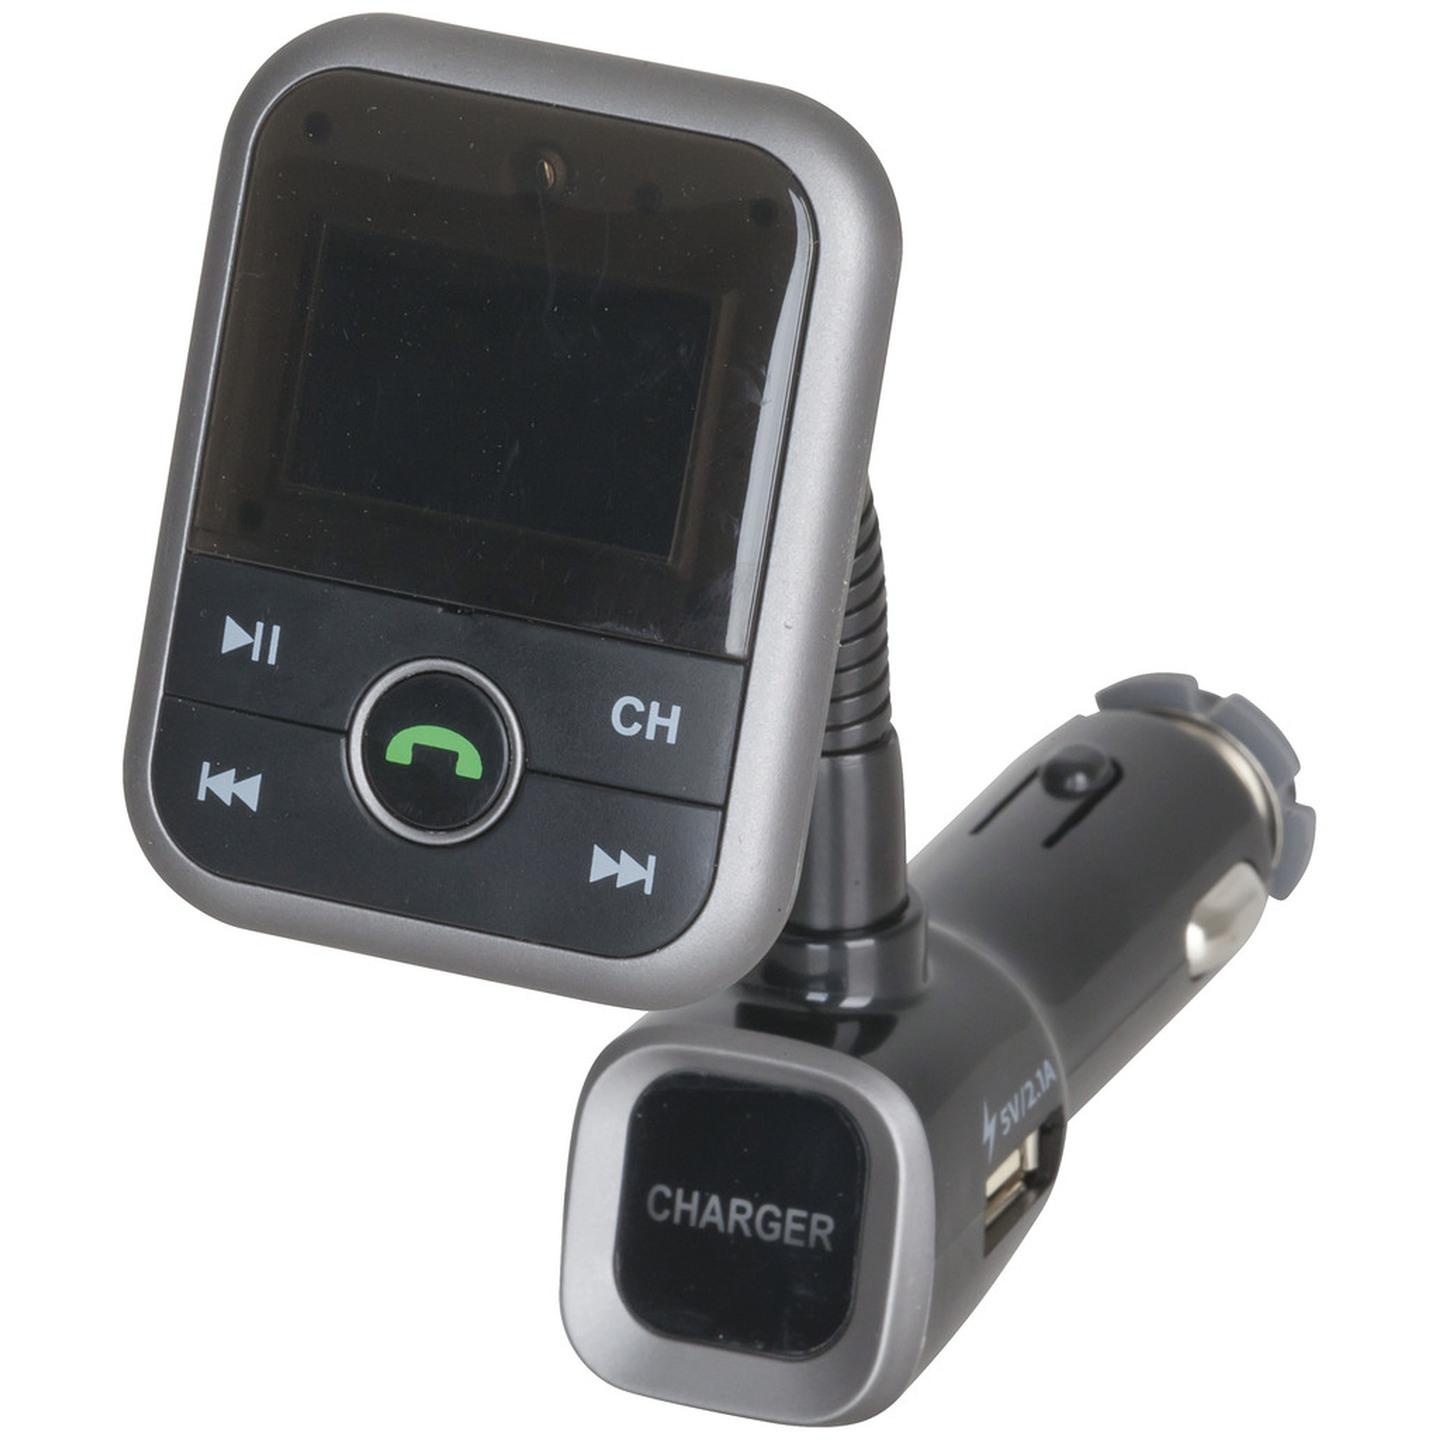 Bluetooth Handsfree with FM Transmitter and USB Charge Port